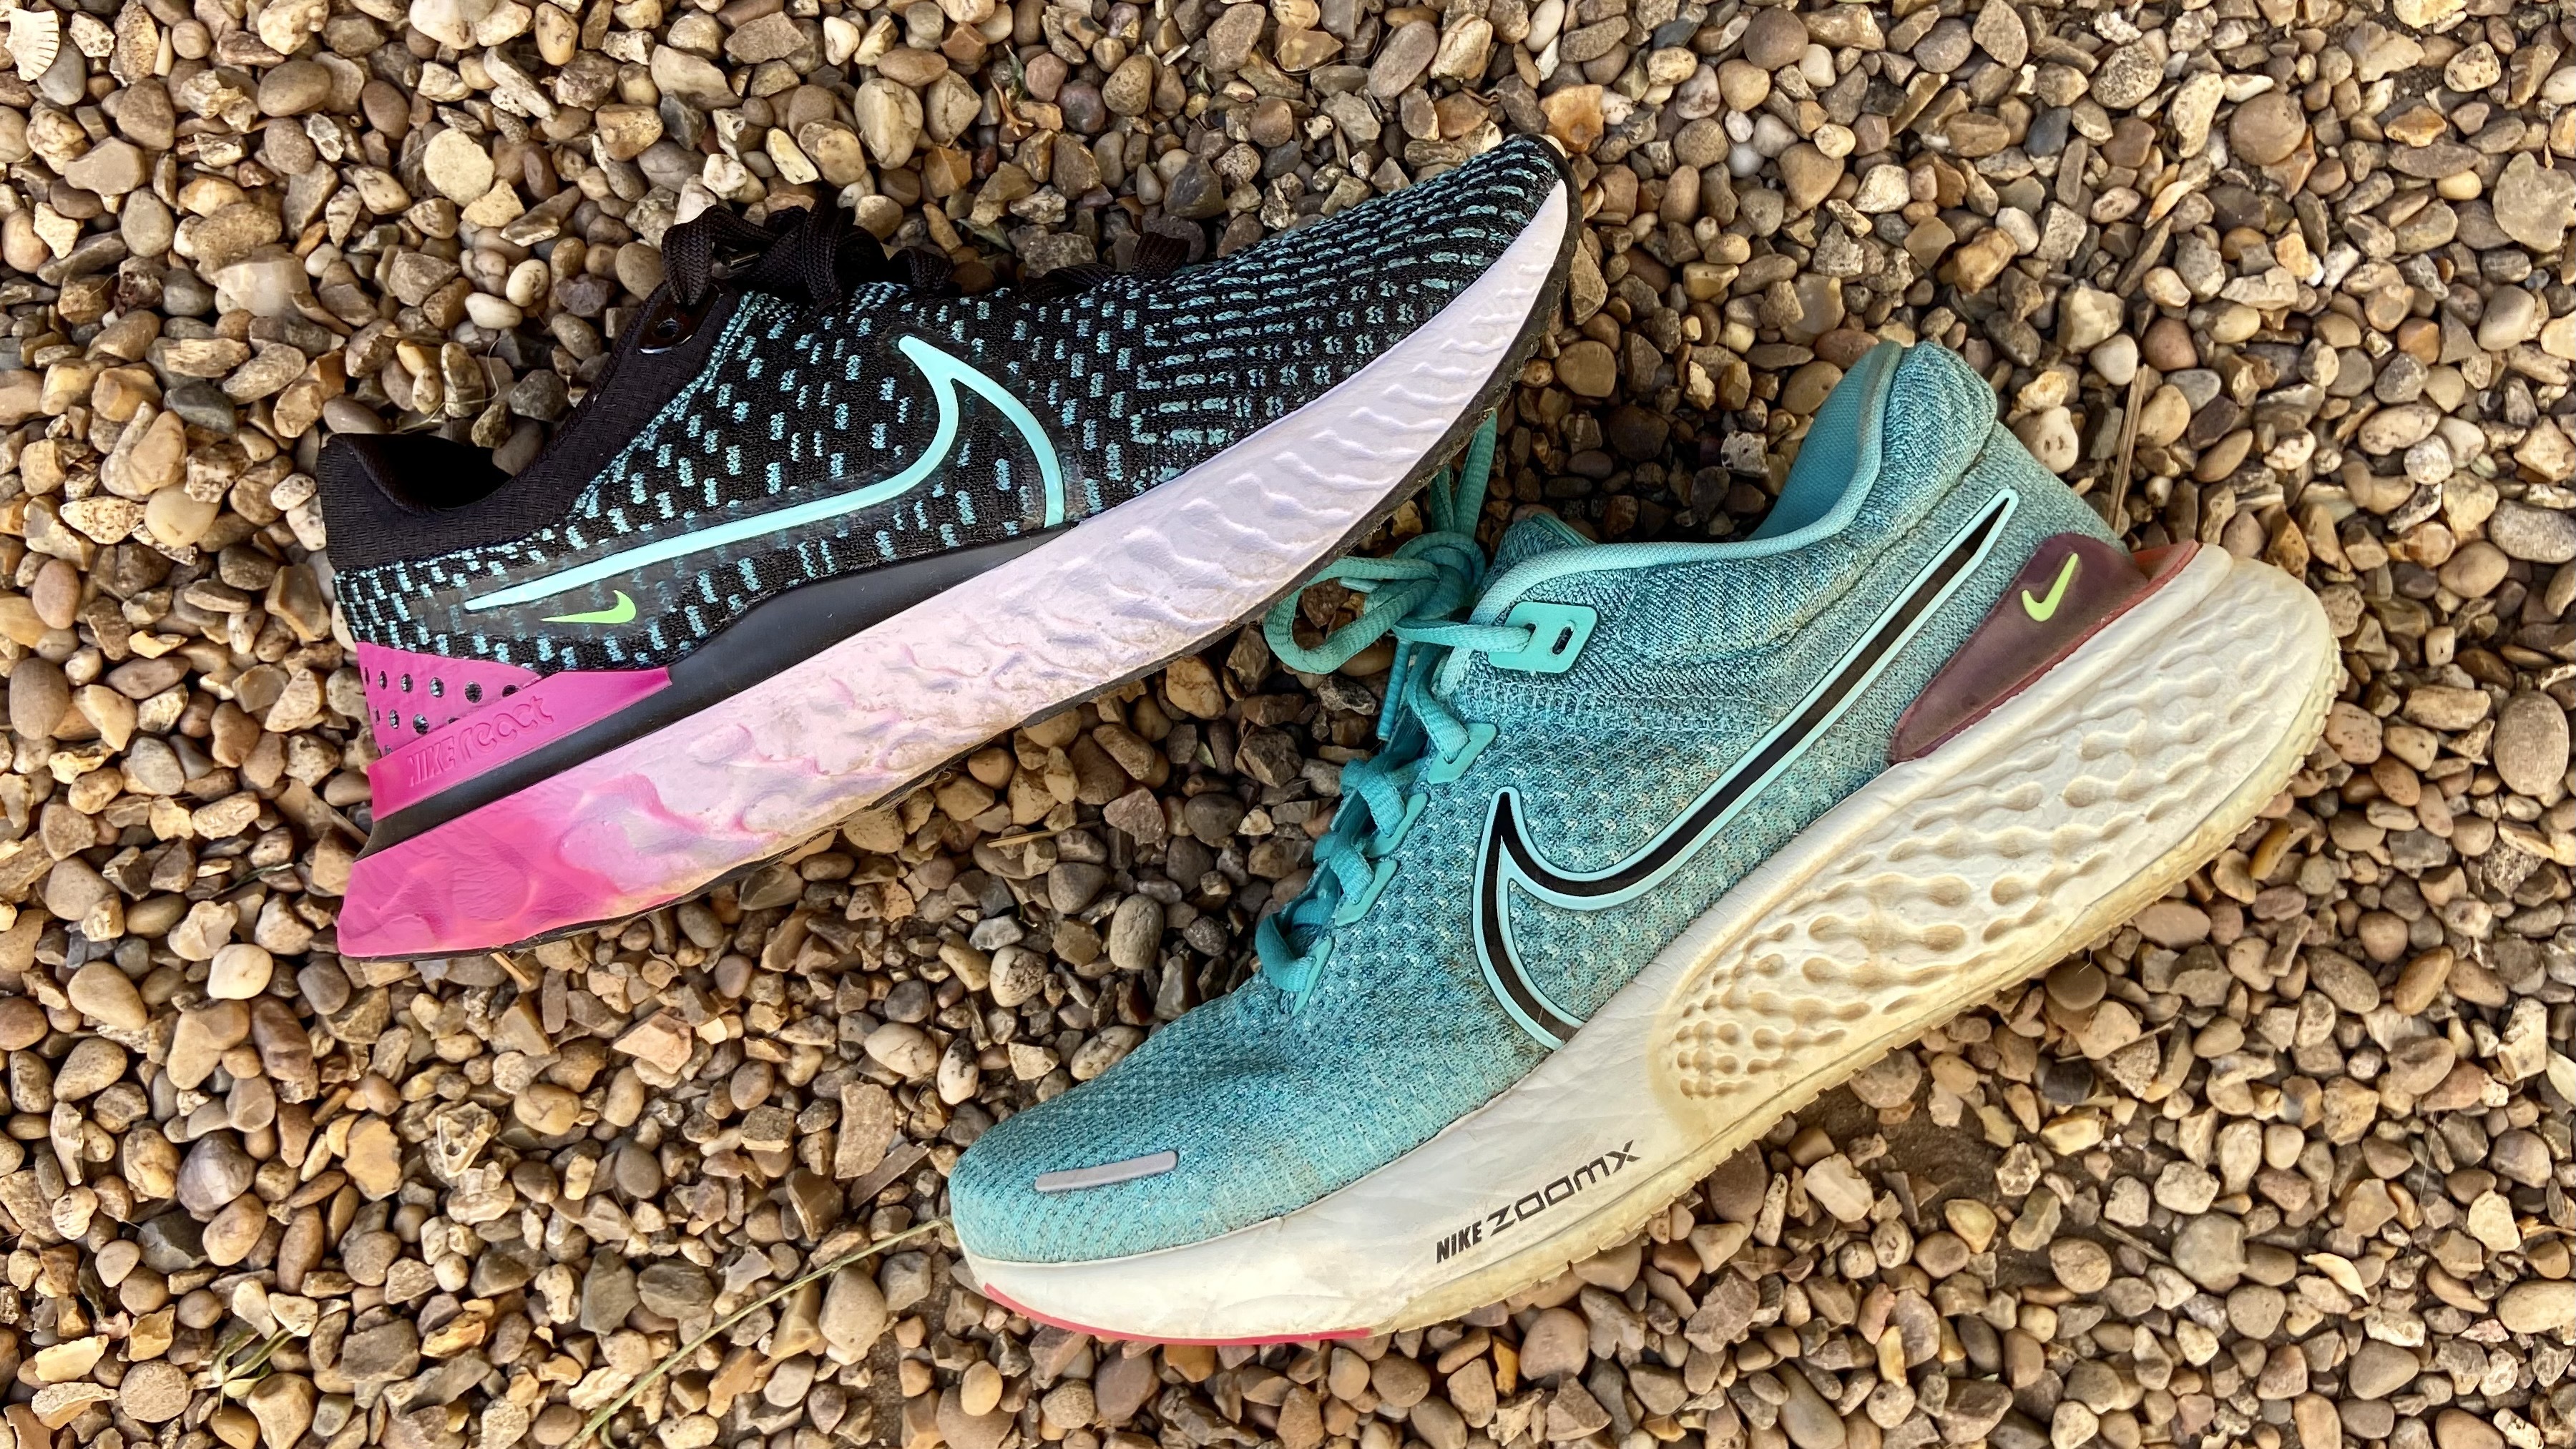 Nike ZoomX Invincible Run Flyknit 3 vs 2 Comparison Running Shoe Review